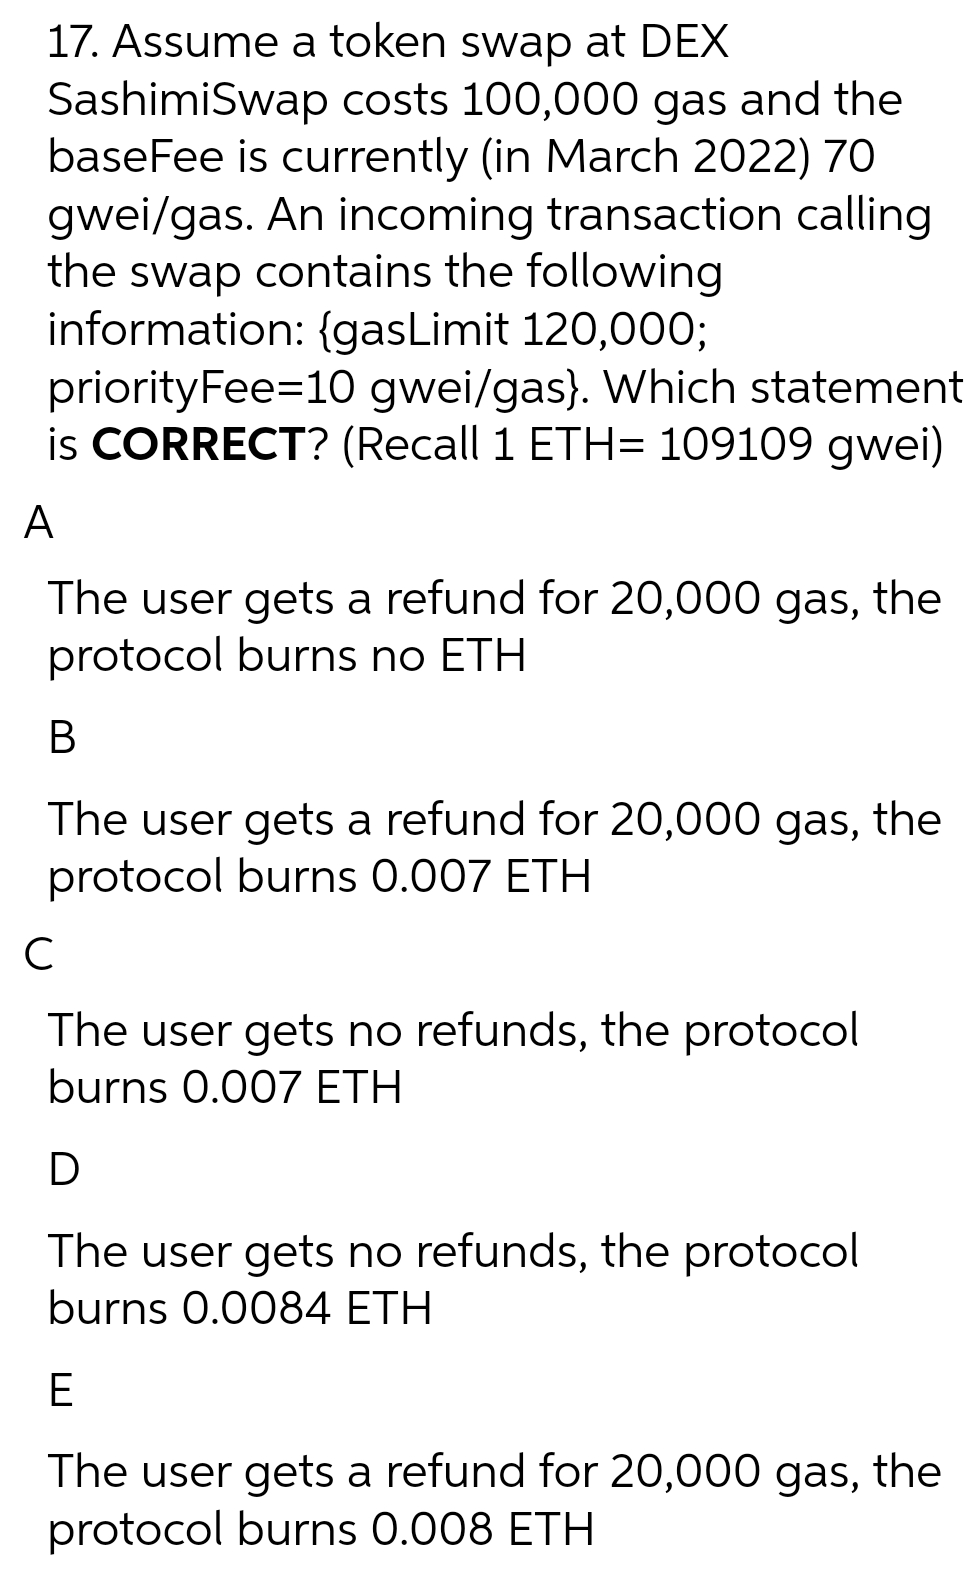 17. Assume a token swap at DEX
SashimiSwap costs 100,000 gas and the
baseFee is currently (in March 2022) 70
gwei/gas. An incoming transaction calling
the swap contains the following
information: {gasLimit 120,000;
priorityFee=10 gwei/gas}. Which statement
is CORRECT? (Recall 1 ETH= 109109 gwei)
A
The user gets a refund for 20,000 gas, the
protocol burns no ETH
В
The user gets a refund for 20,000 gas, the
protocol burns 0.007 ETH
The user gets no refunds, the protocol
burns 0.007 ETH
The user gets no refunds, the protocol
burns 0.0084 ETH
E
The user gets a refund for 20,000 gas, the
protocol burns 0.008 ETH
